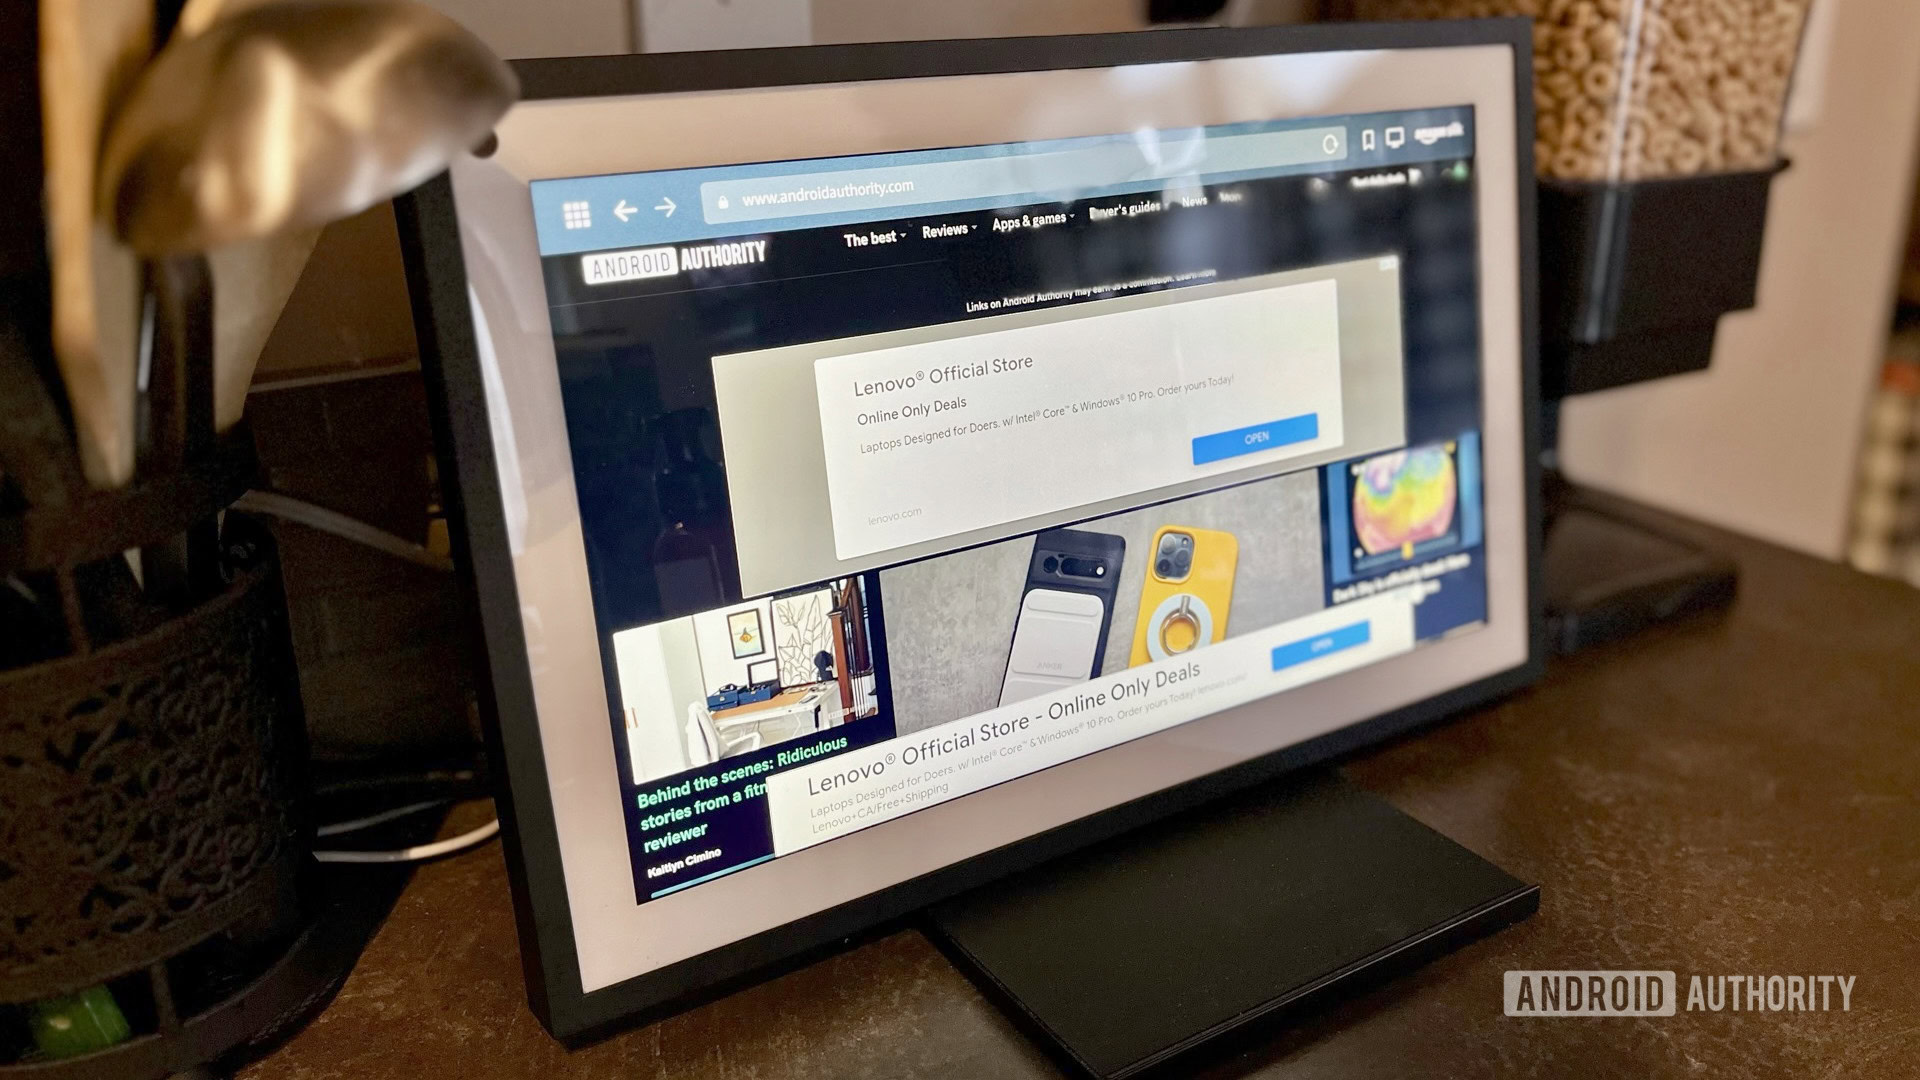 The Echo Show 15, Revisited - The Travel Insider